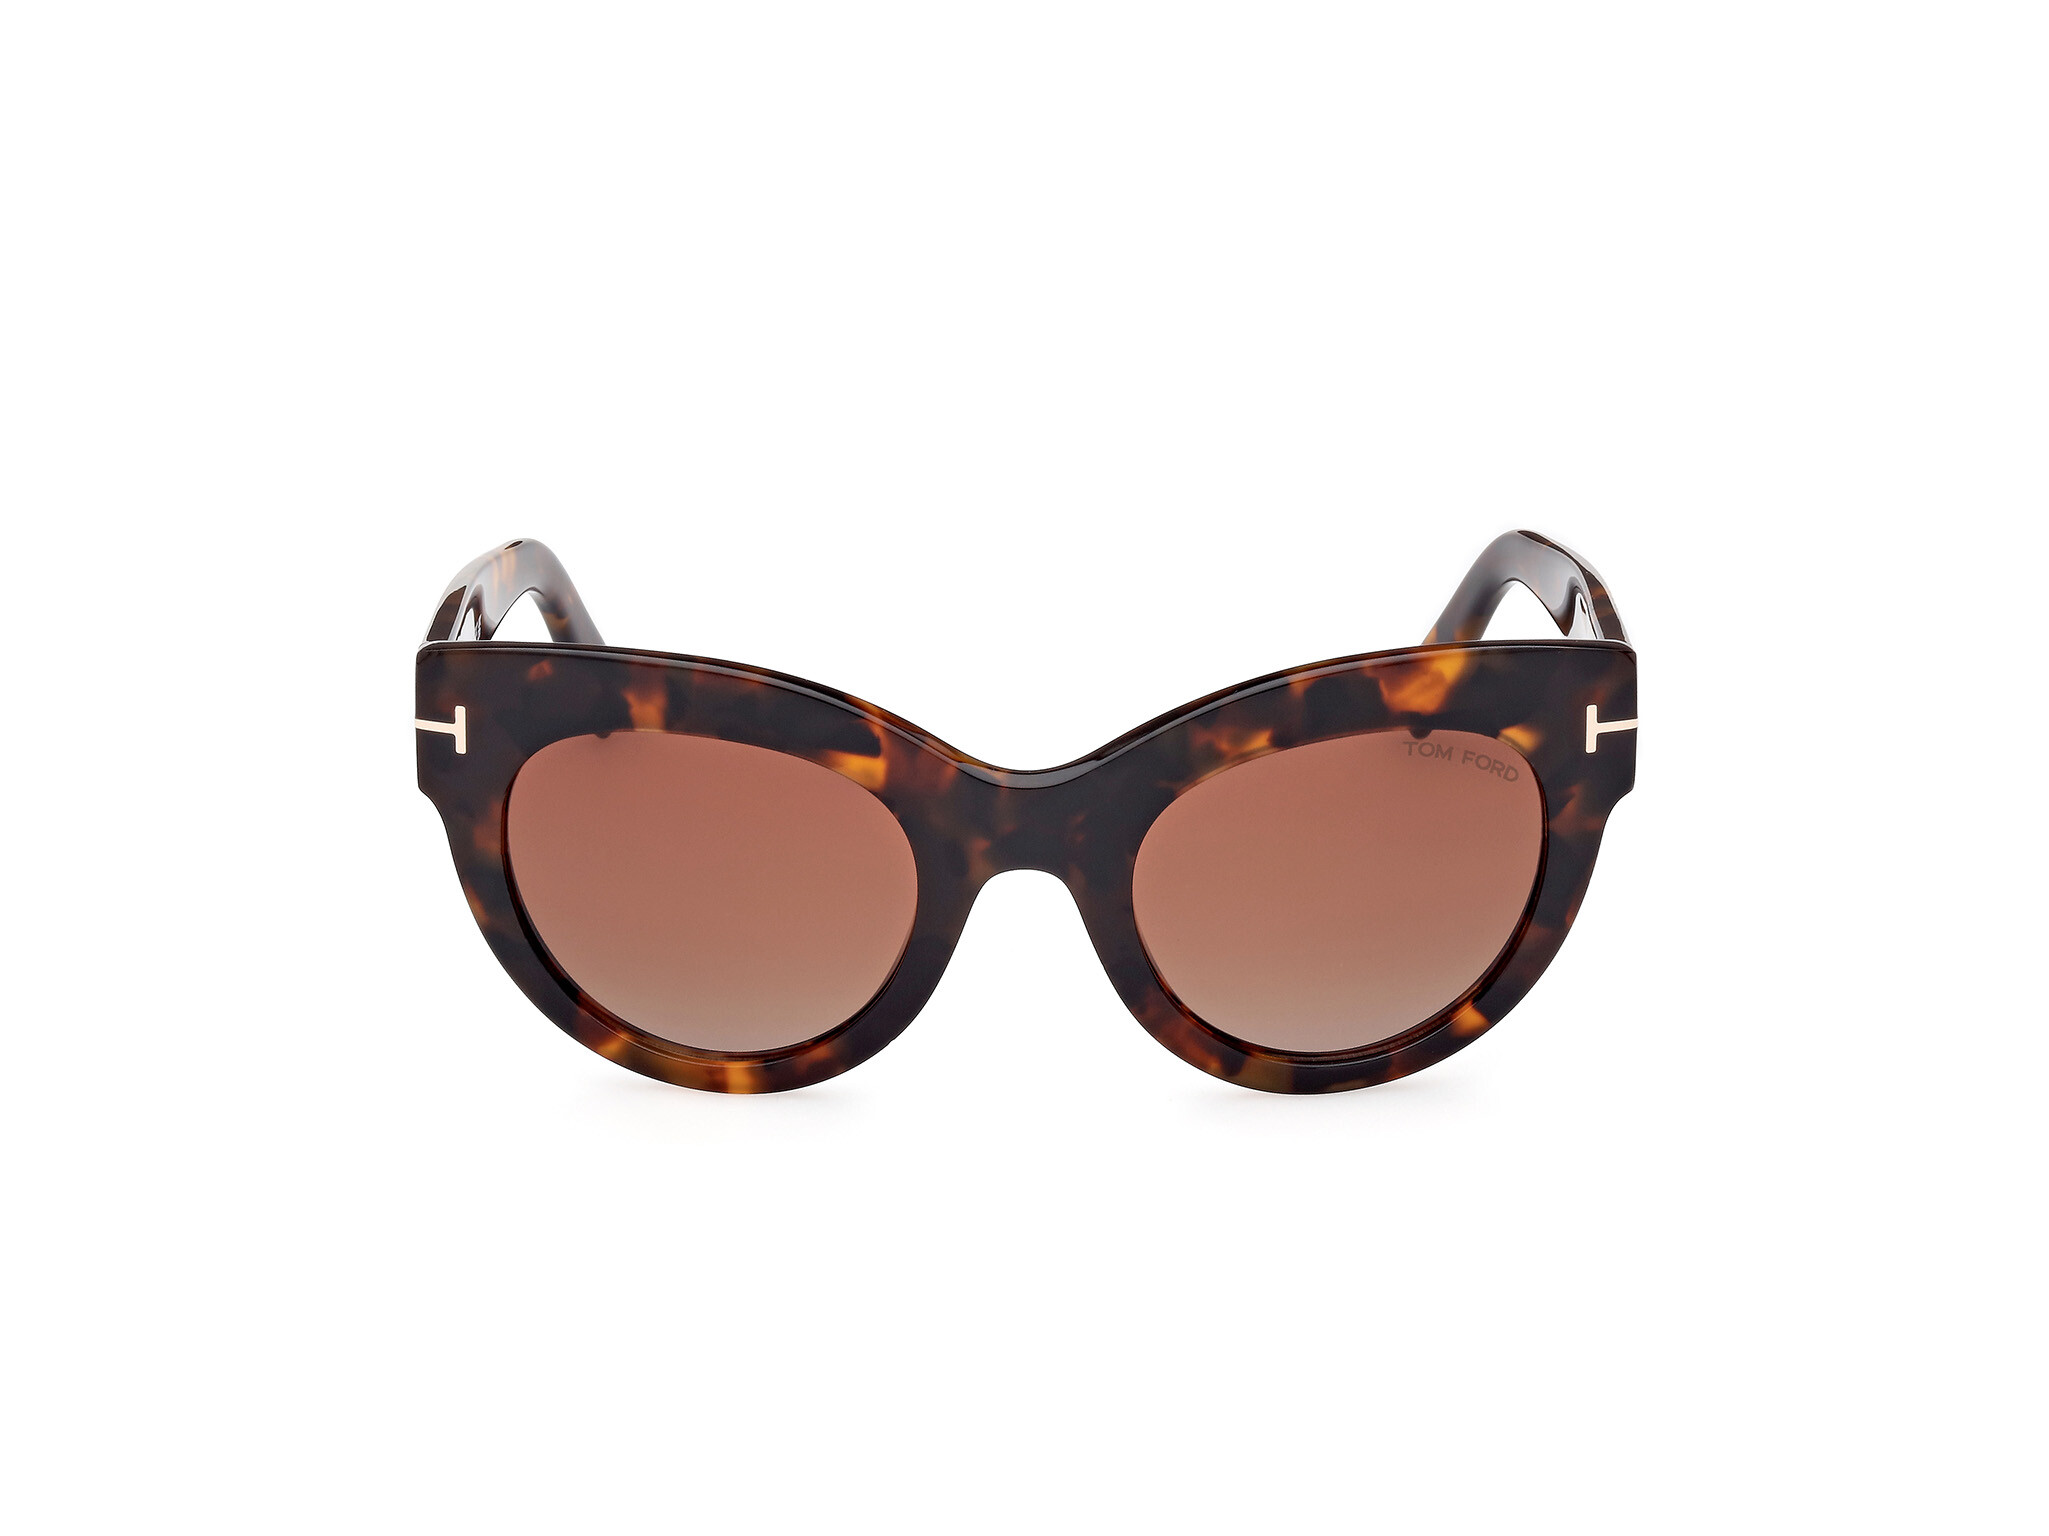 [products.image.front] Tom Ford FT1063 52T Sonnenbrille